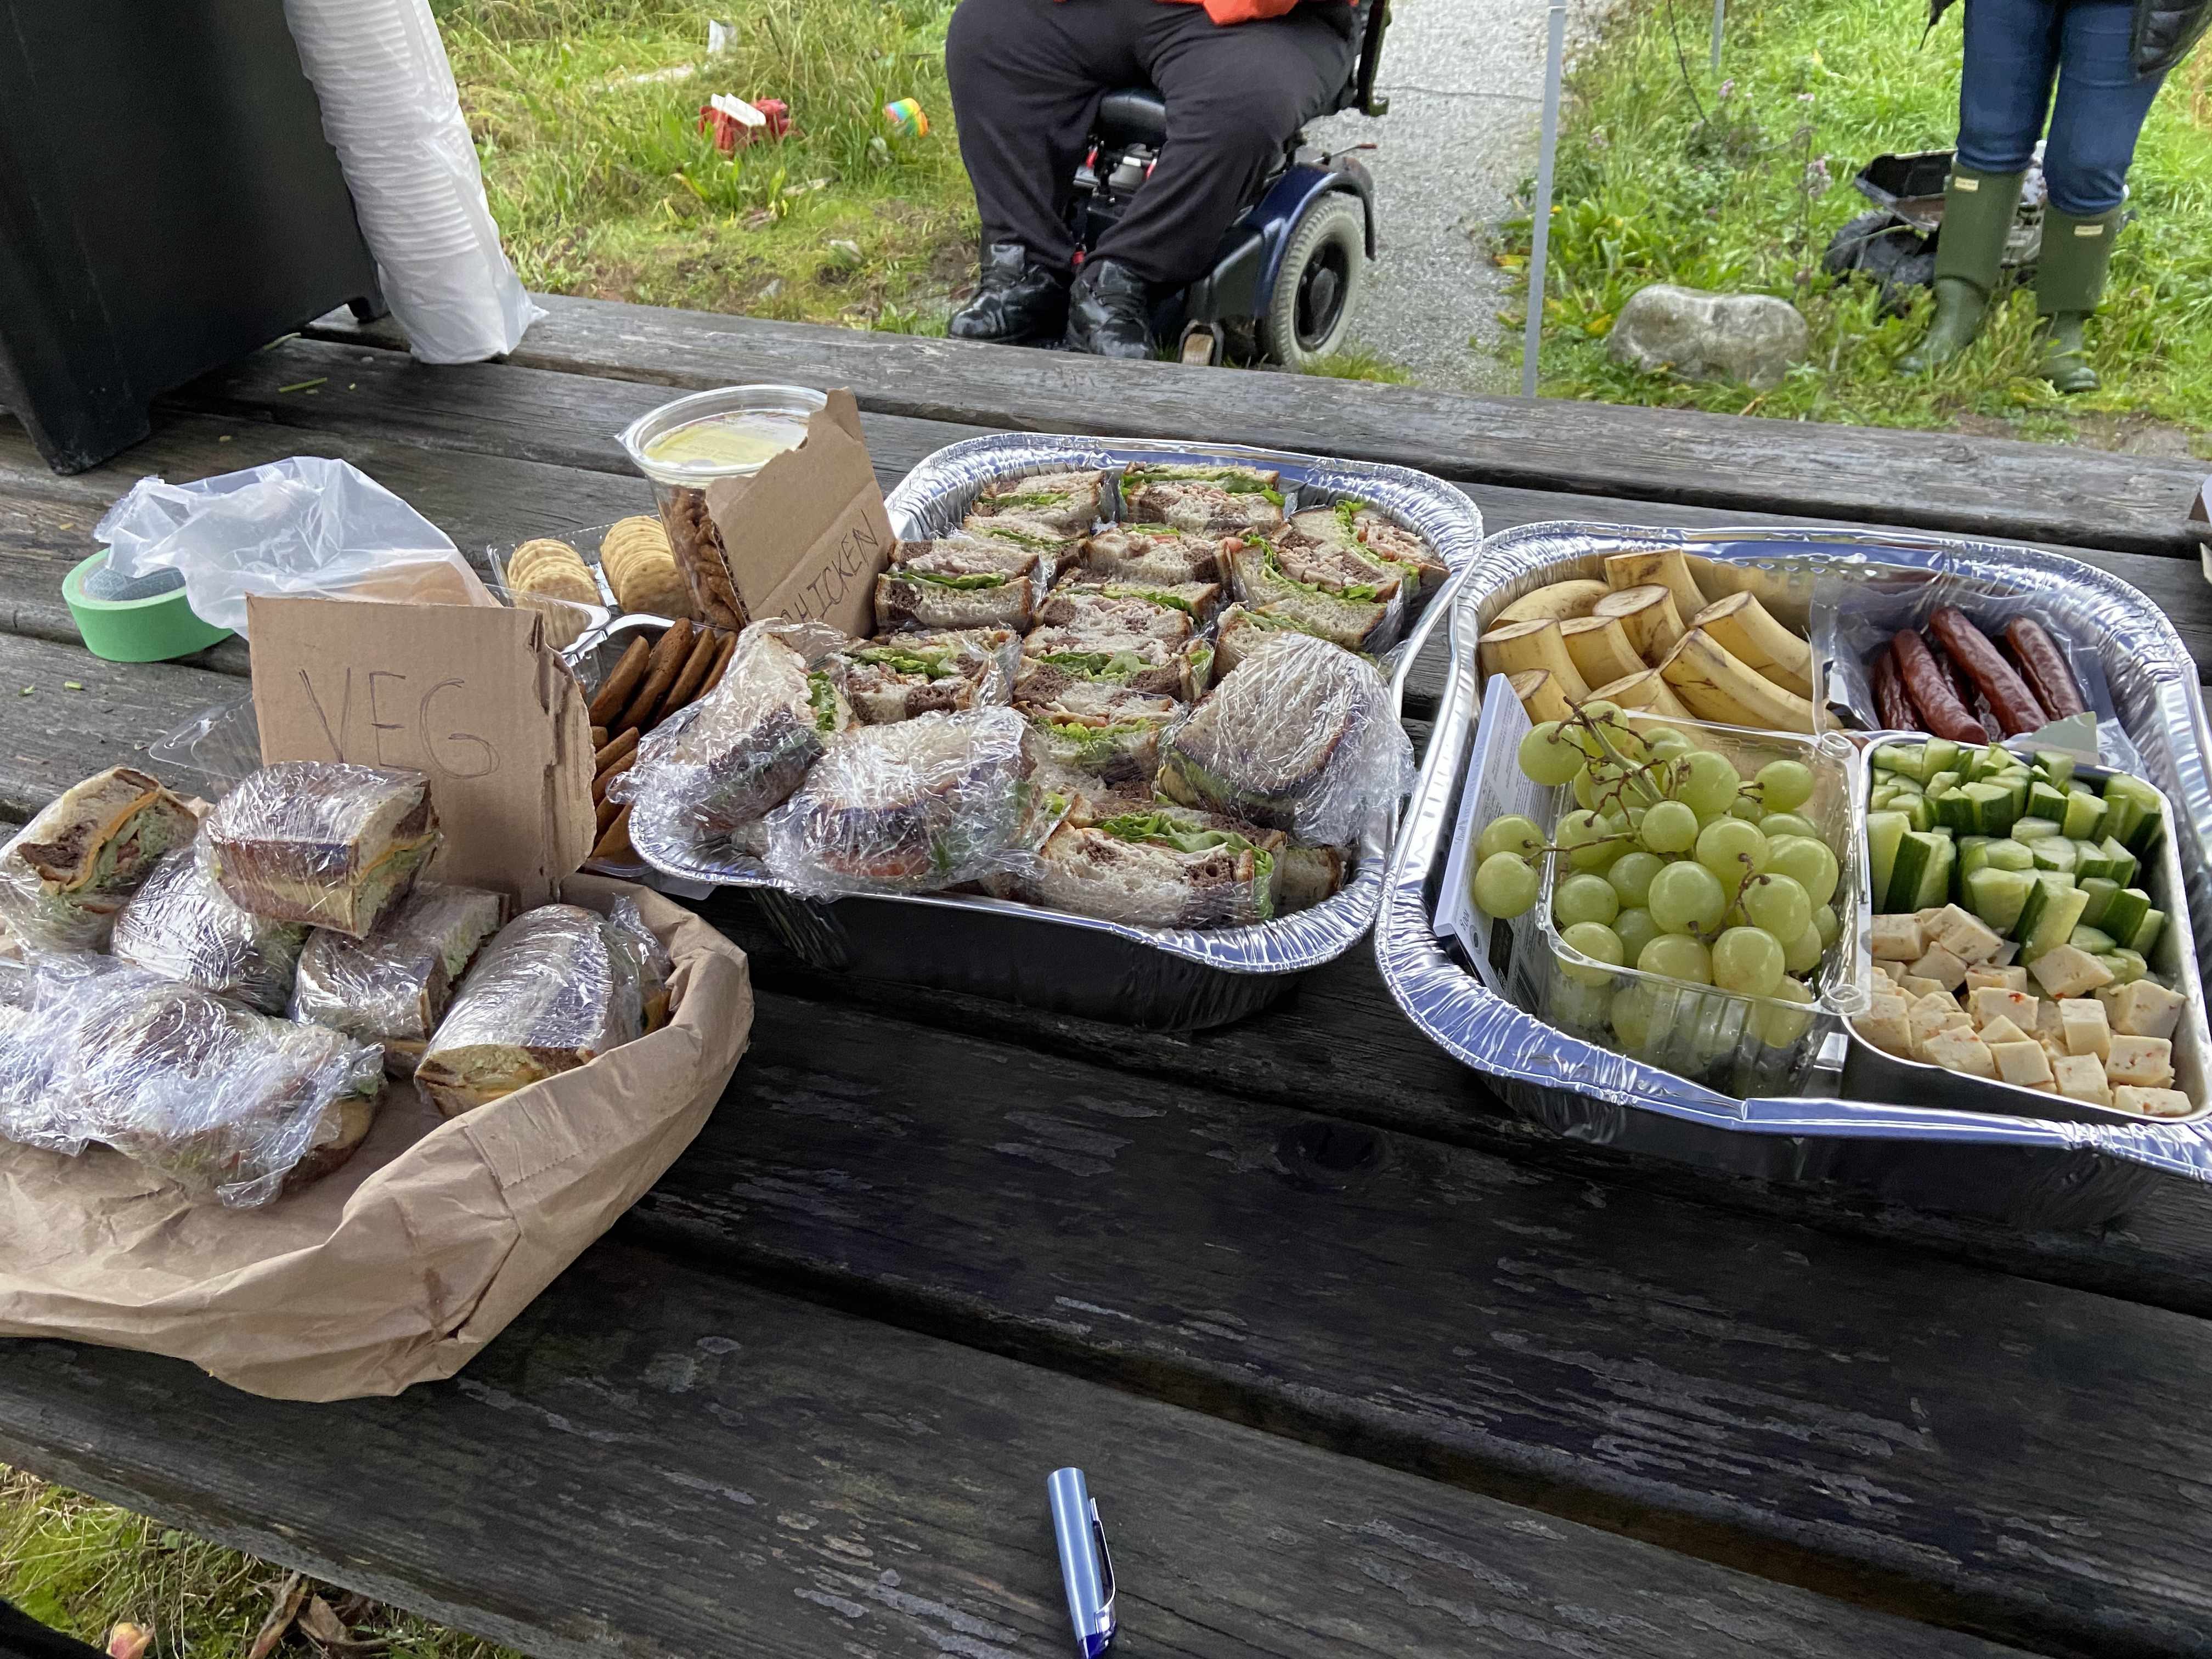 sandwiches cut in half, grapes, bananas, cookies, cheese, cucumbers laid out for guests to nourish themselves on a picnic bench